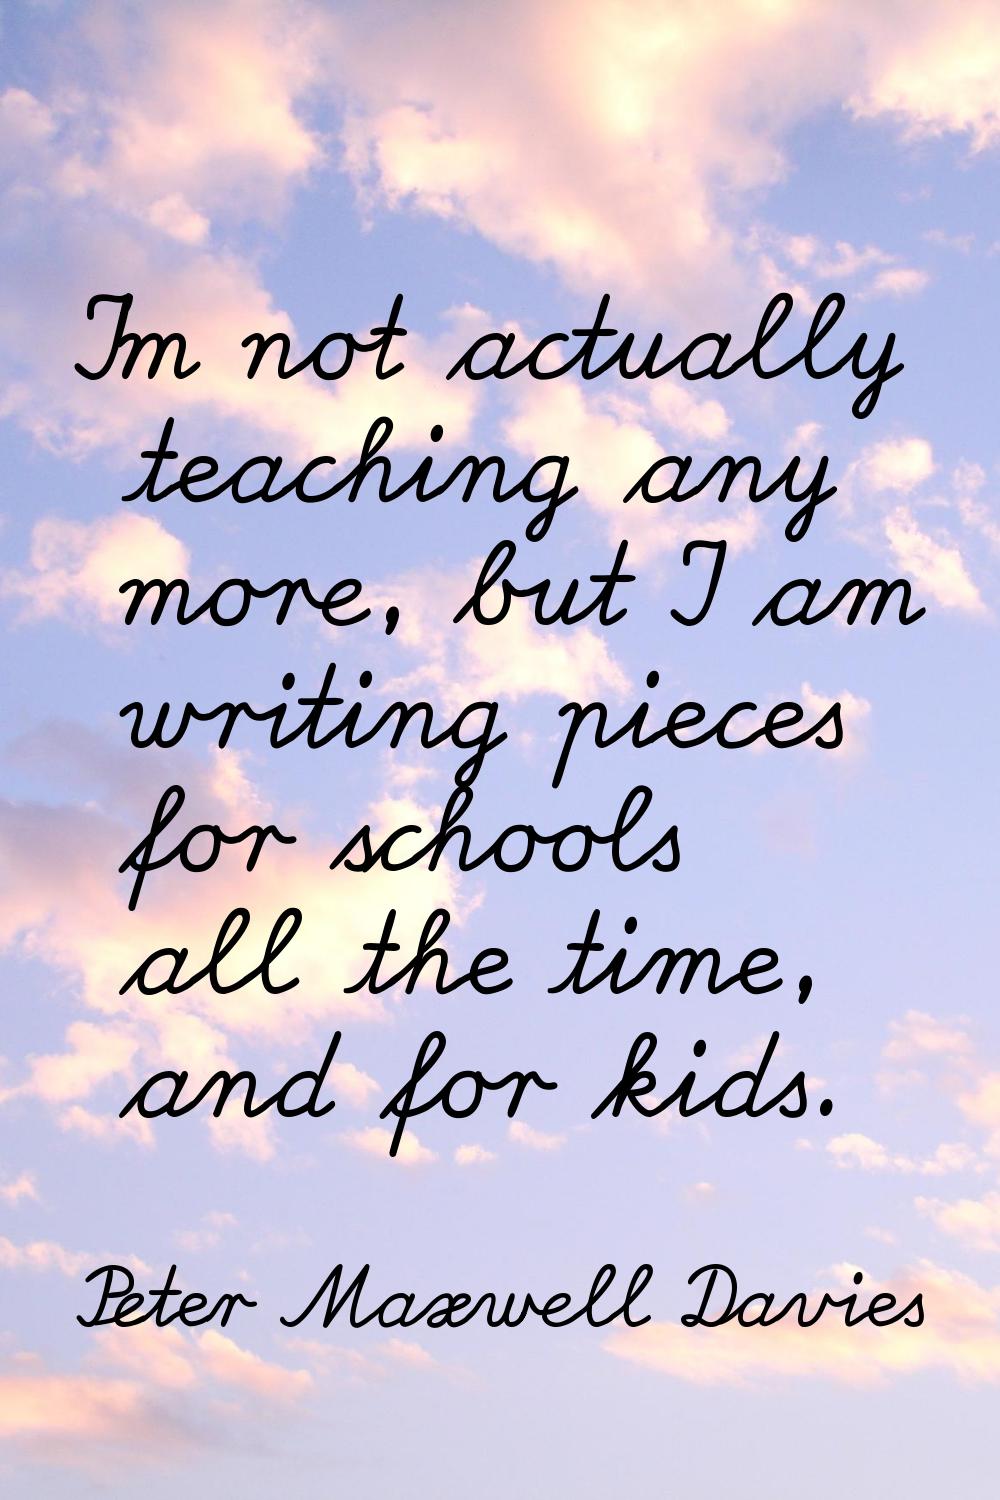 I'm not actually teaching any more, but I am writing pieces for schools all the time, and for kids.